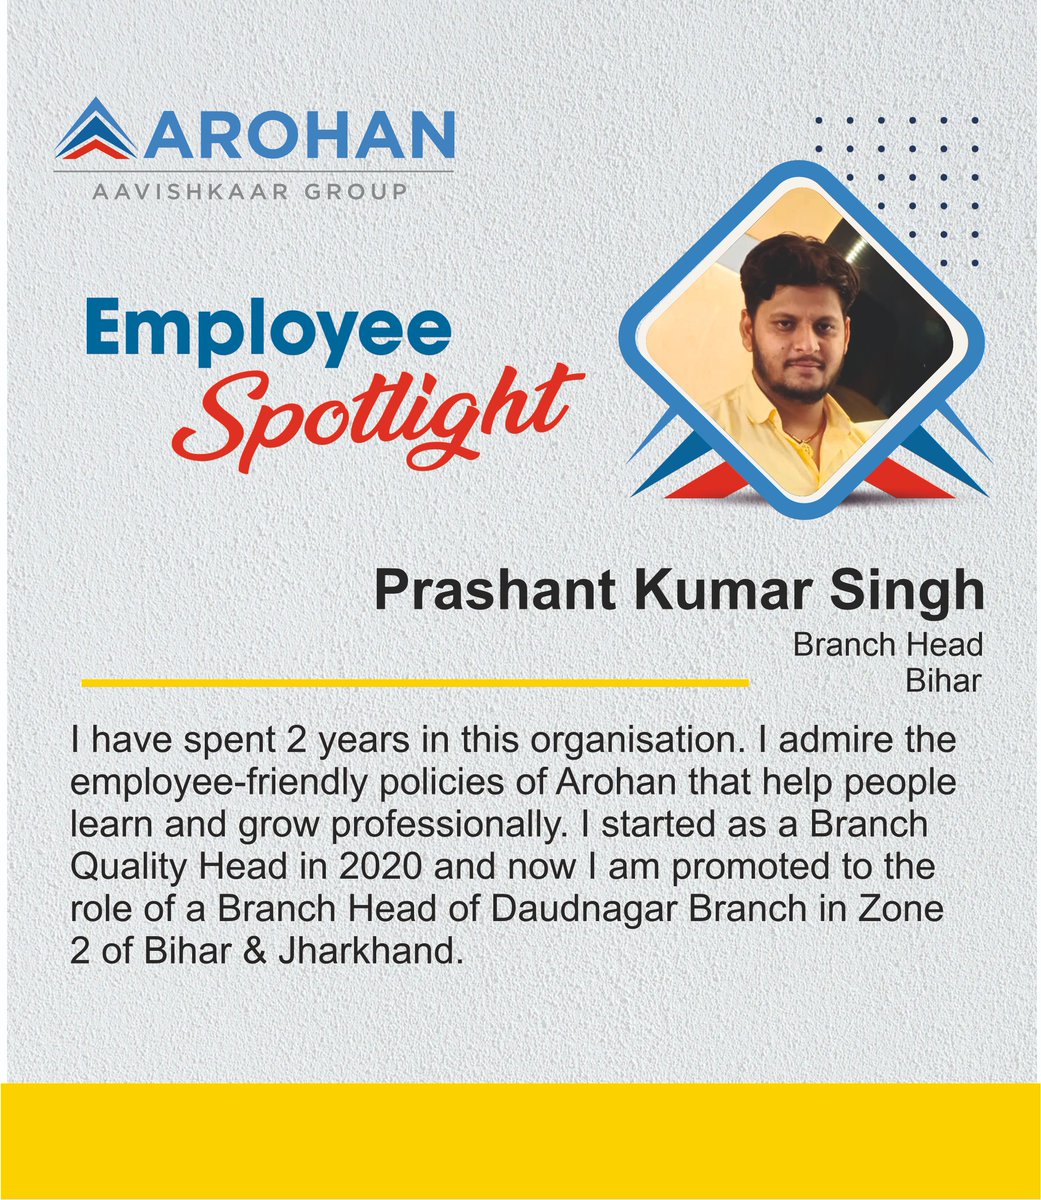 Read what Prashant, an #Arohanite from Bihar, Business team, has to say about his experience with the organisation.
Watch this space to know more about 
#LifeatArohan #ArohanEmployeeSpotlight #GenderDiversity